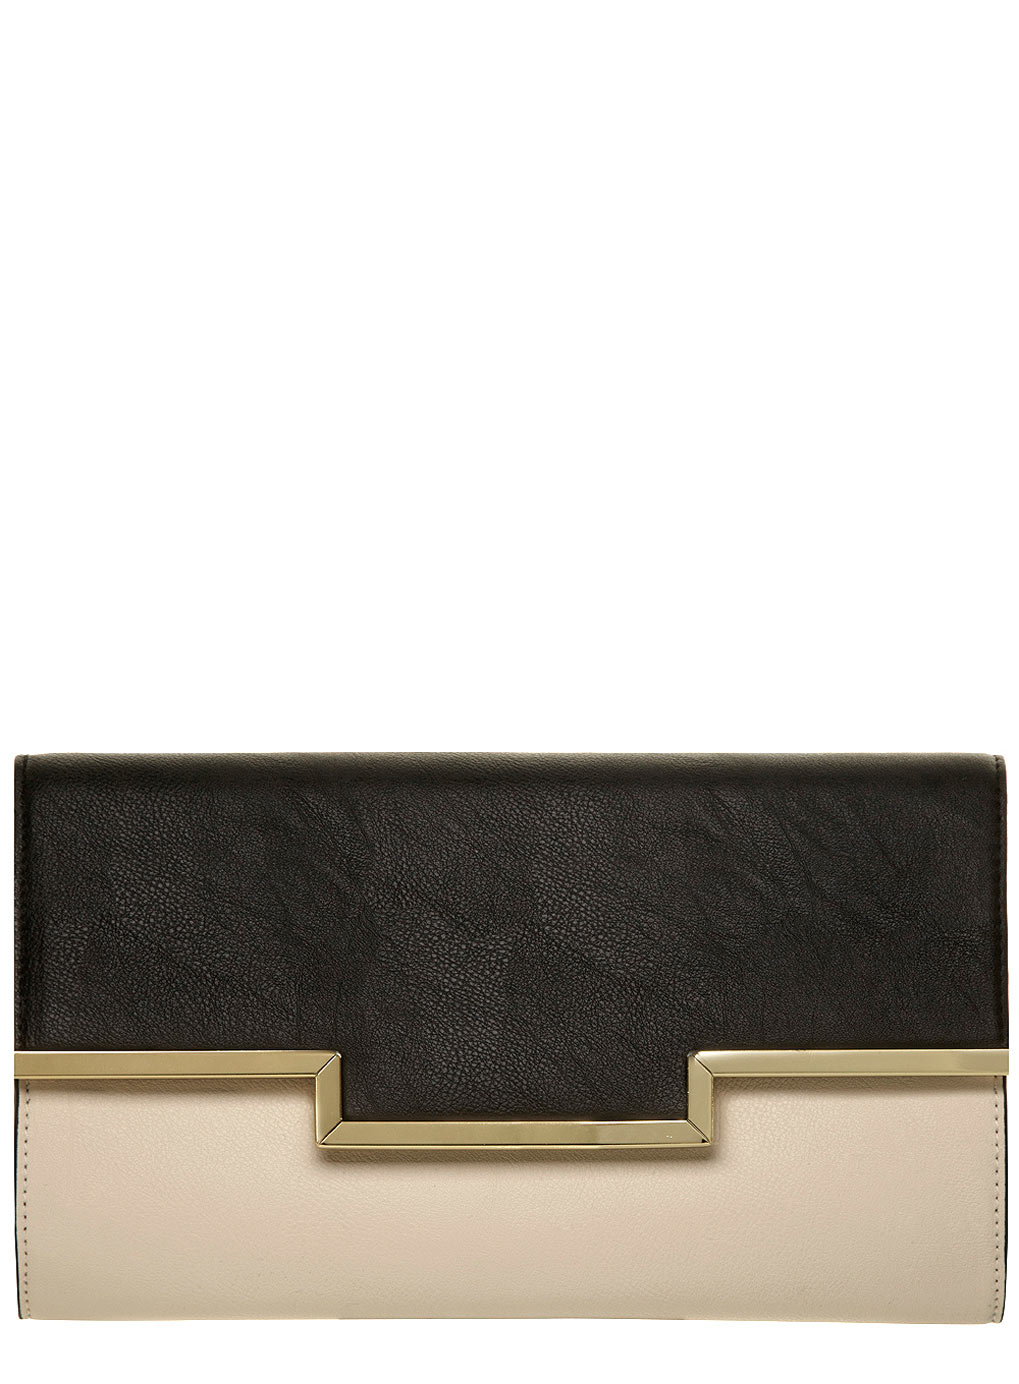 Dorothy Perkins Black and cream stepped clutch 18341832